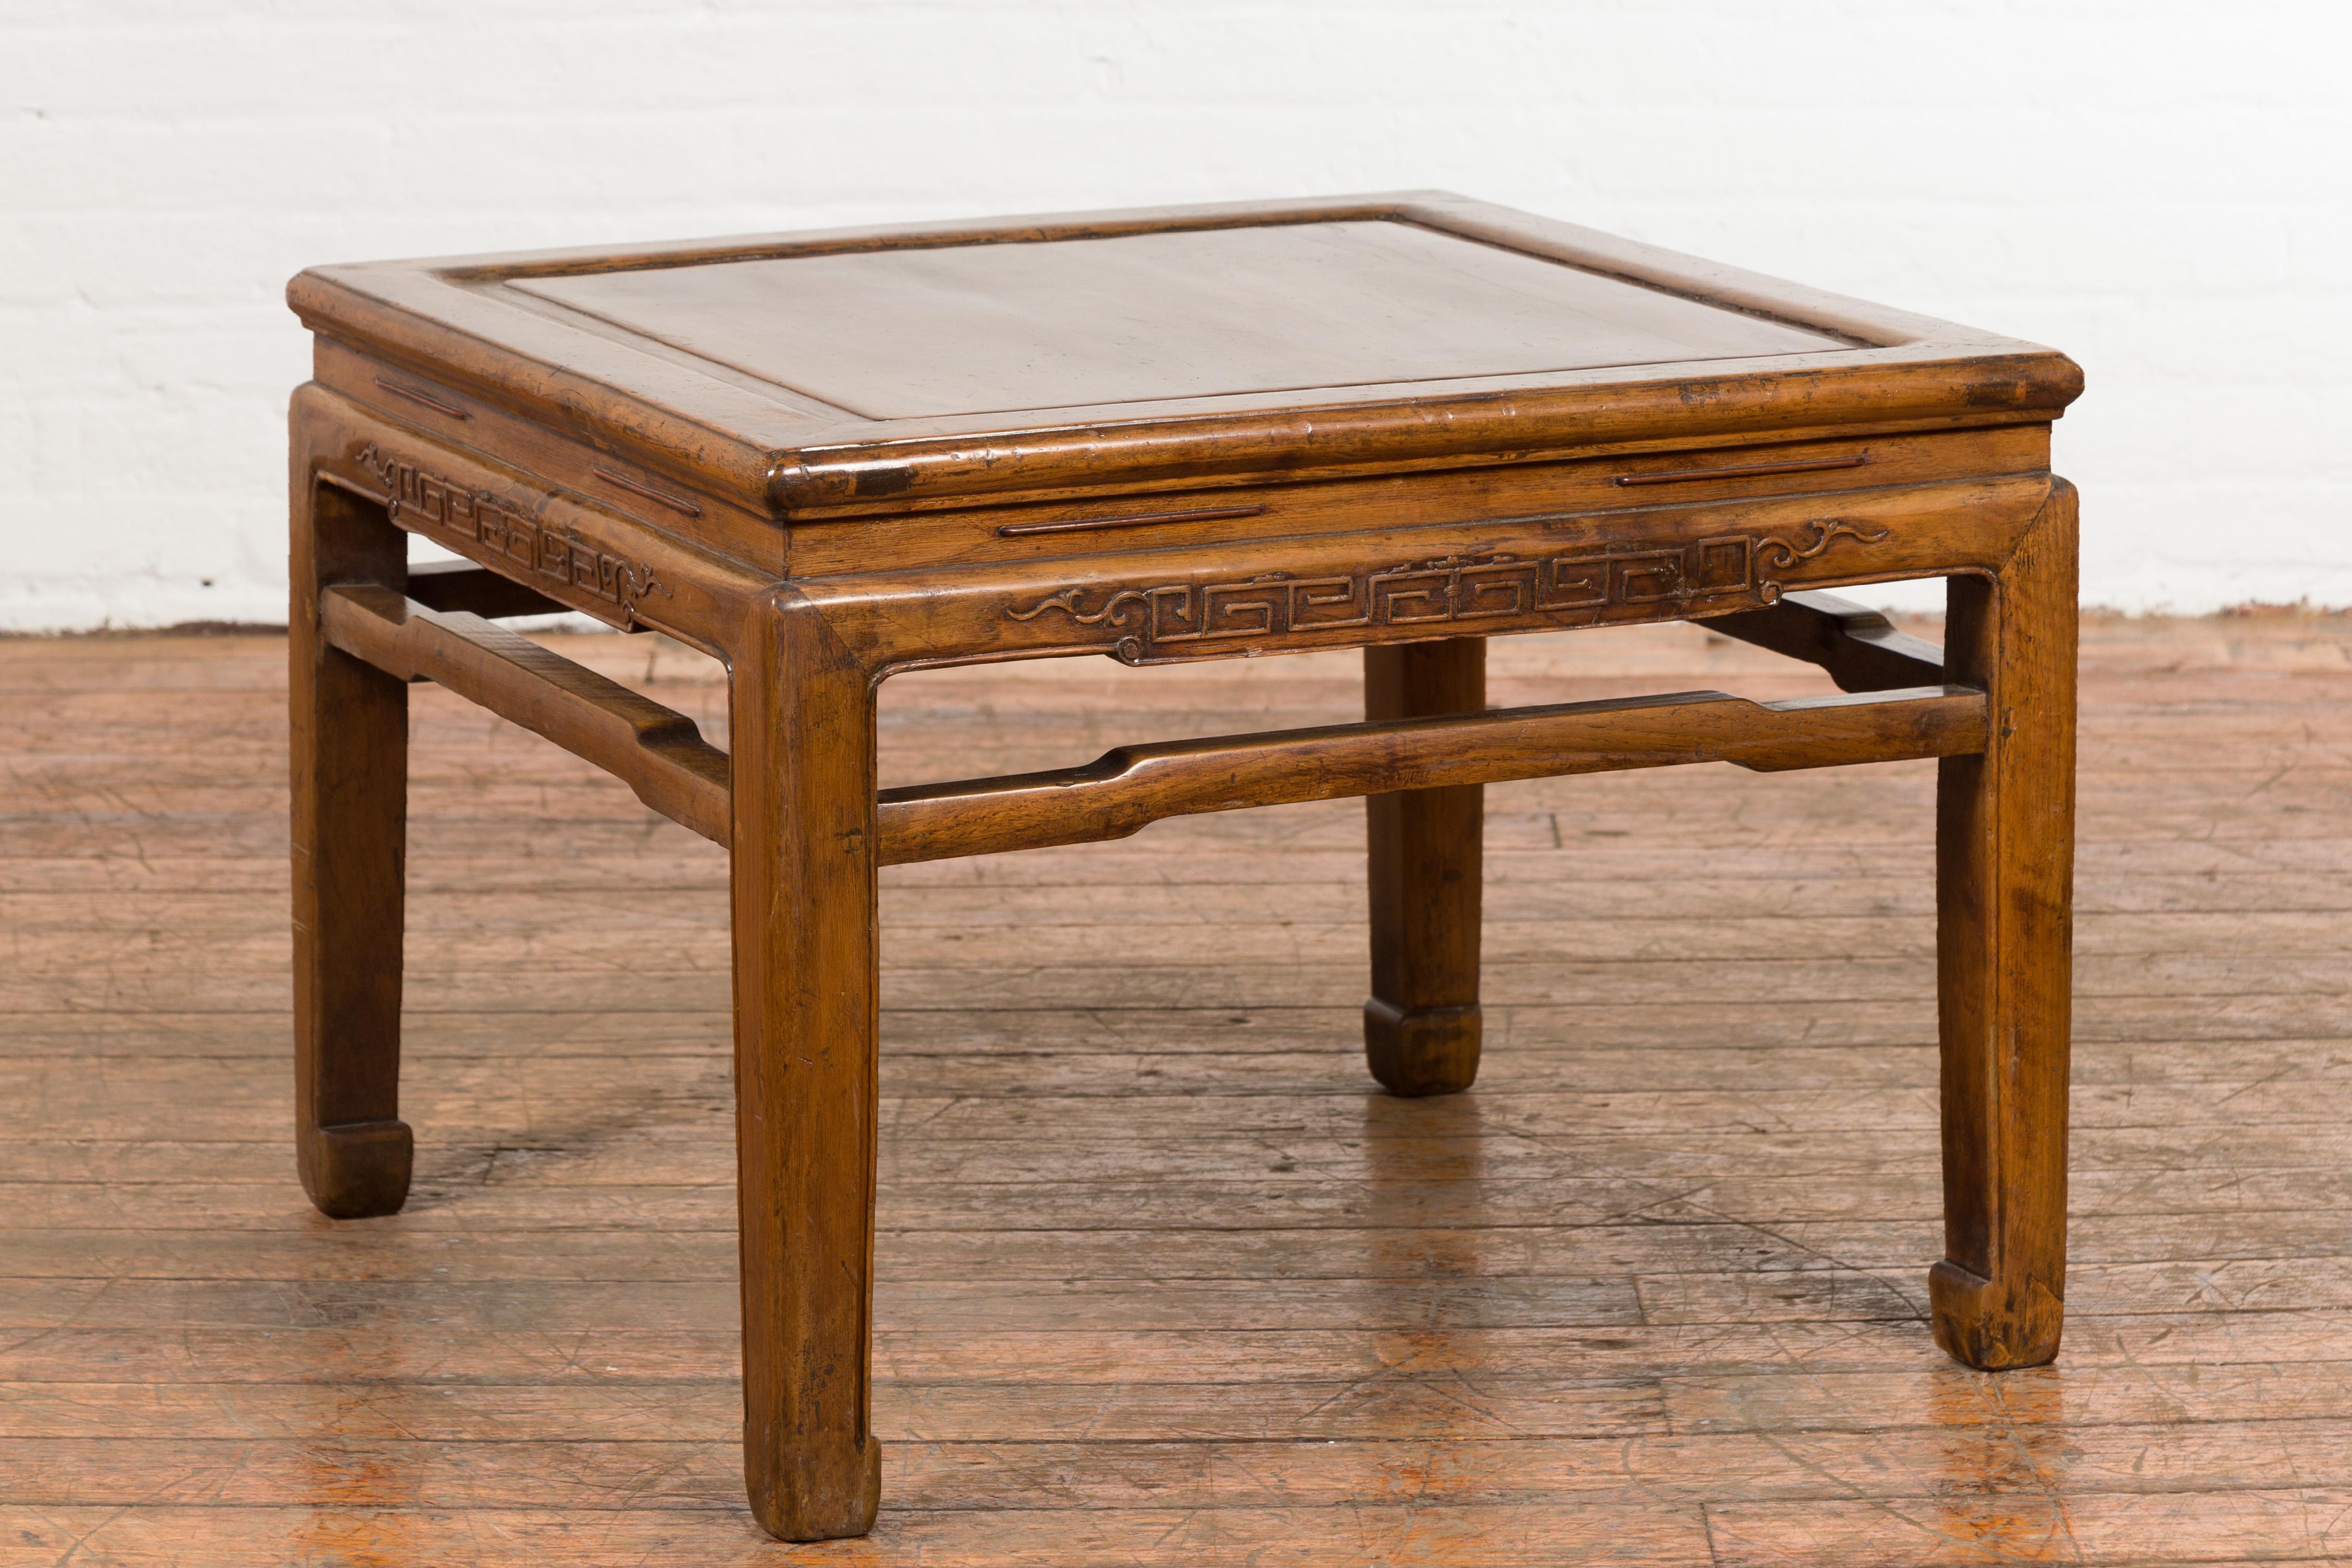 A Chinese vintage Ming Dynasty style low side table from the mid 20th century, with horse hoof extremities. Created in China during the midcentury period, this side table was originally conceived to be used as a stool. Featuring a waisted square top